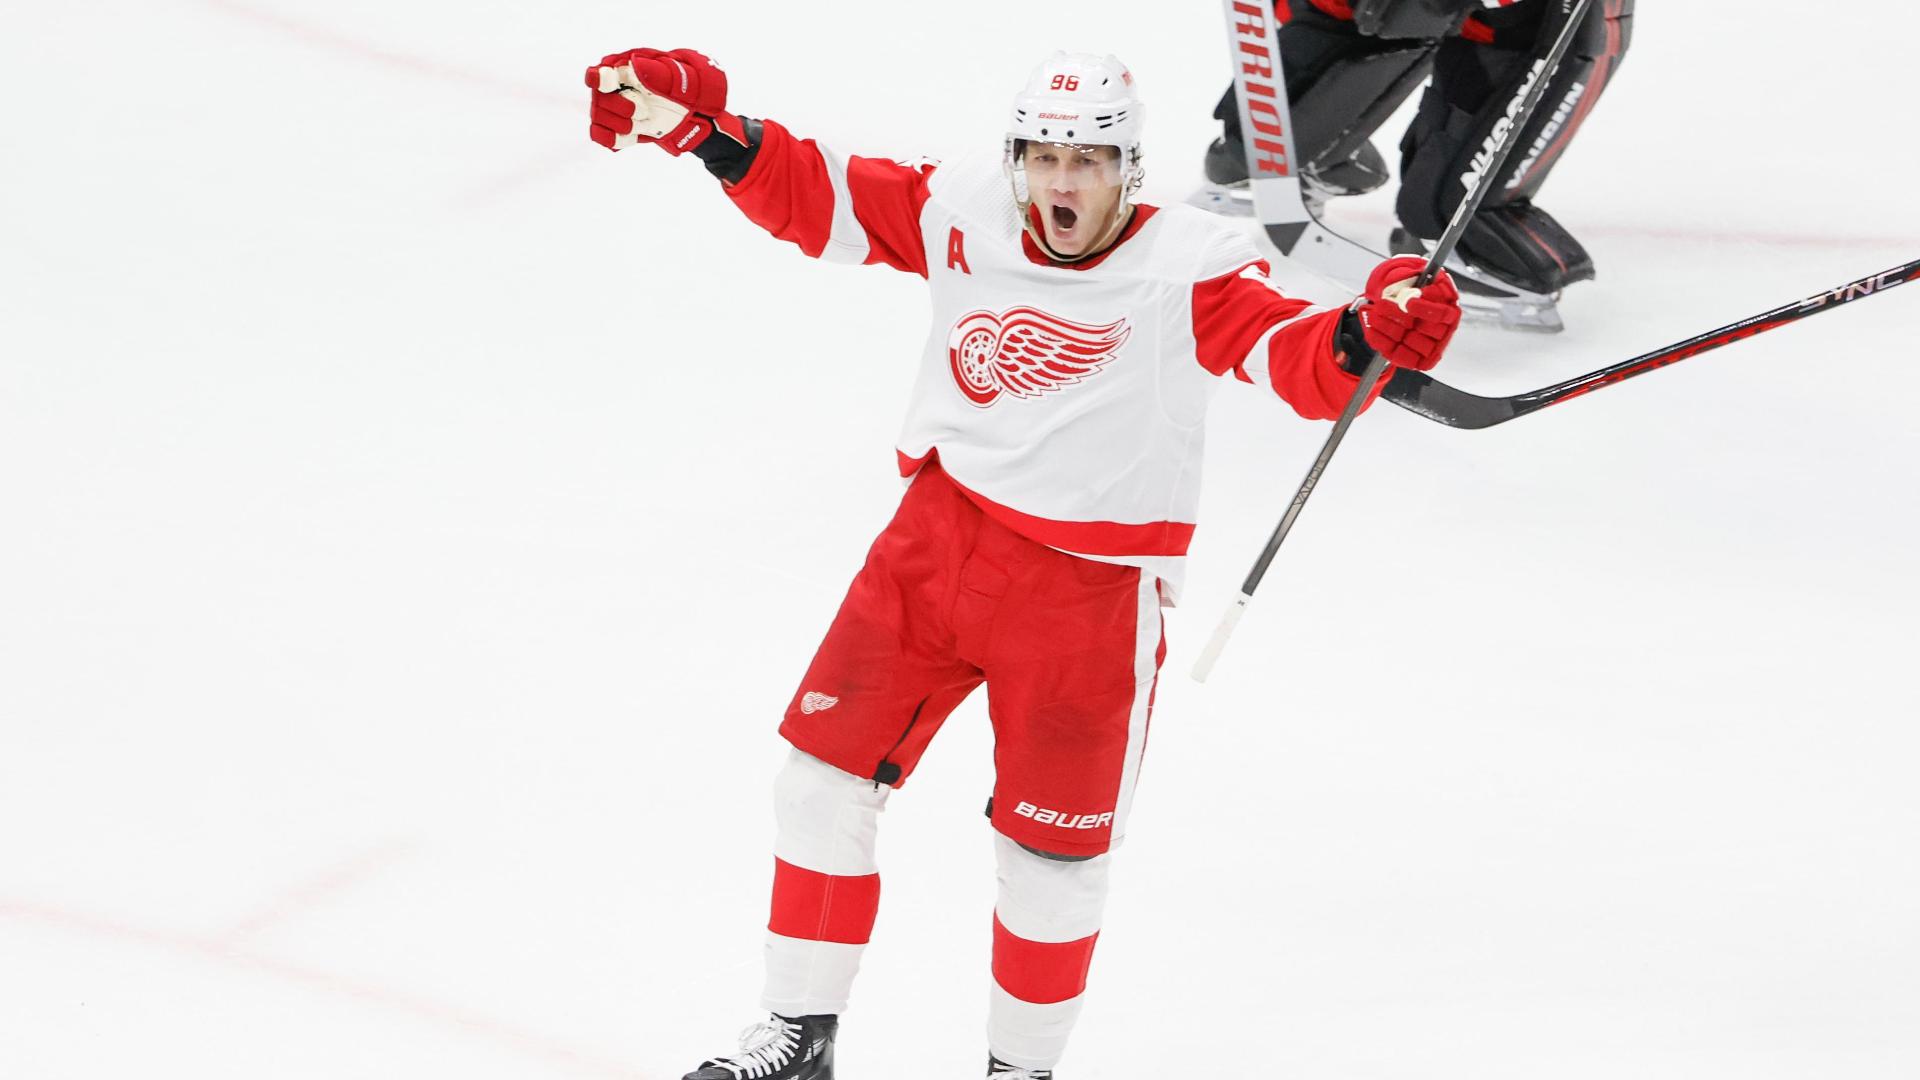 Patrick Kane's OT goal wins it for Red Wings in Chicago reunion